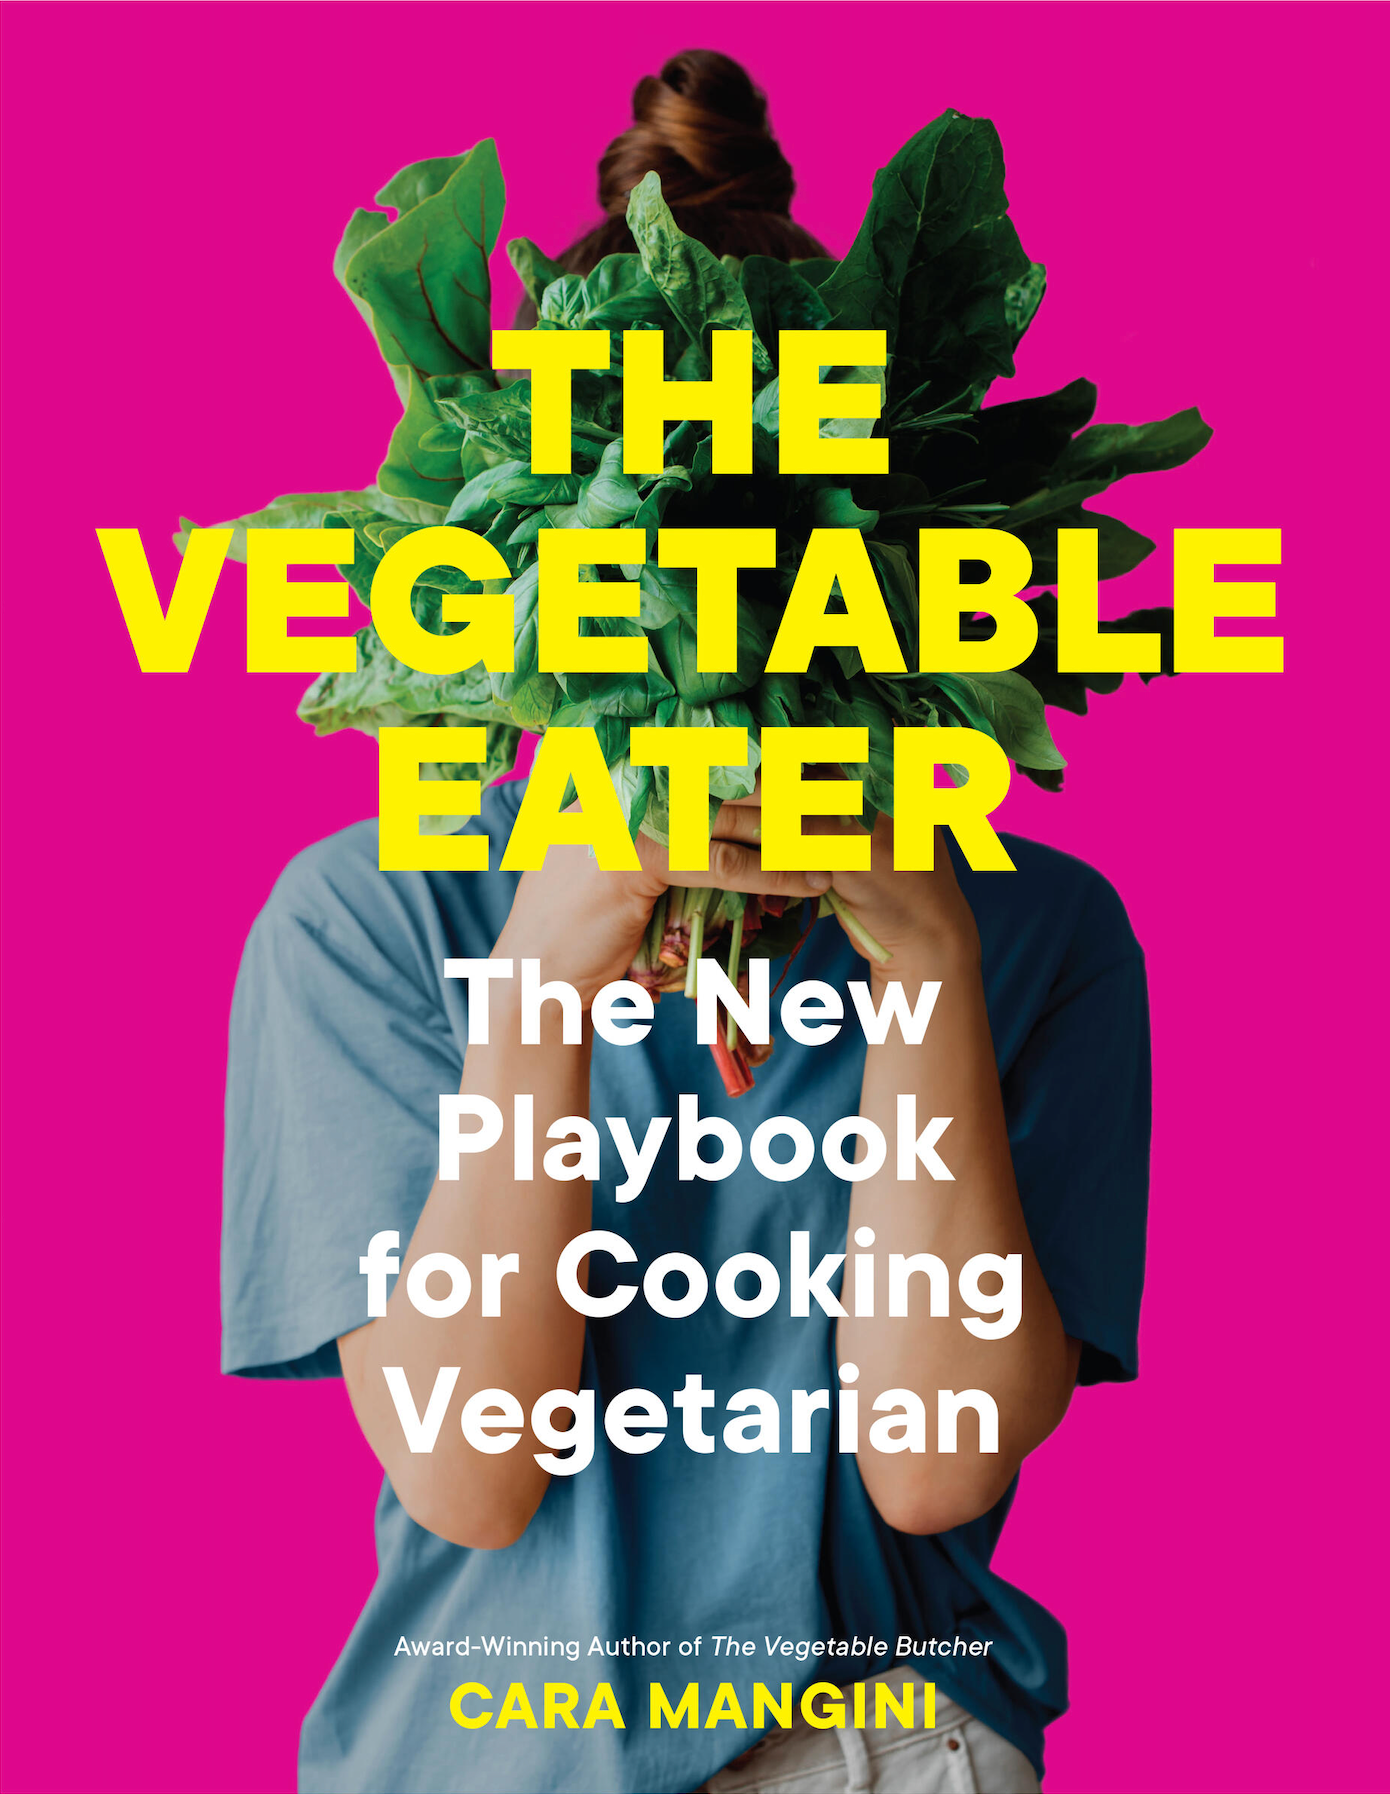 *Pre-order* The Vegetable Eater: The New Playbook for Cooking Vegetarian (Cara Mangini) *Signed*